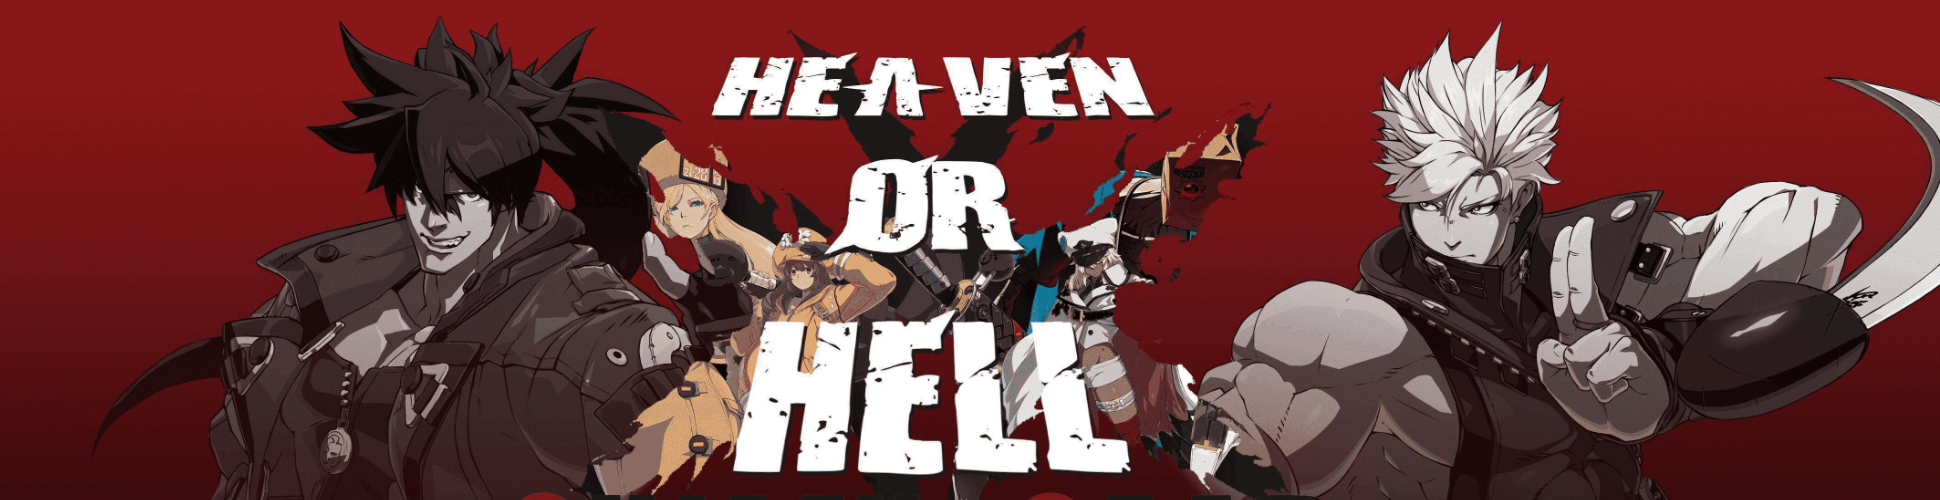 Heaven or Hell #52 